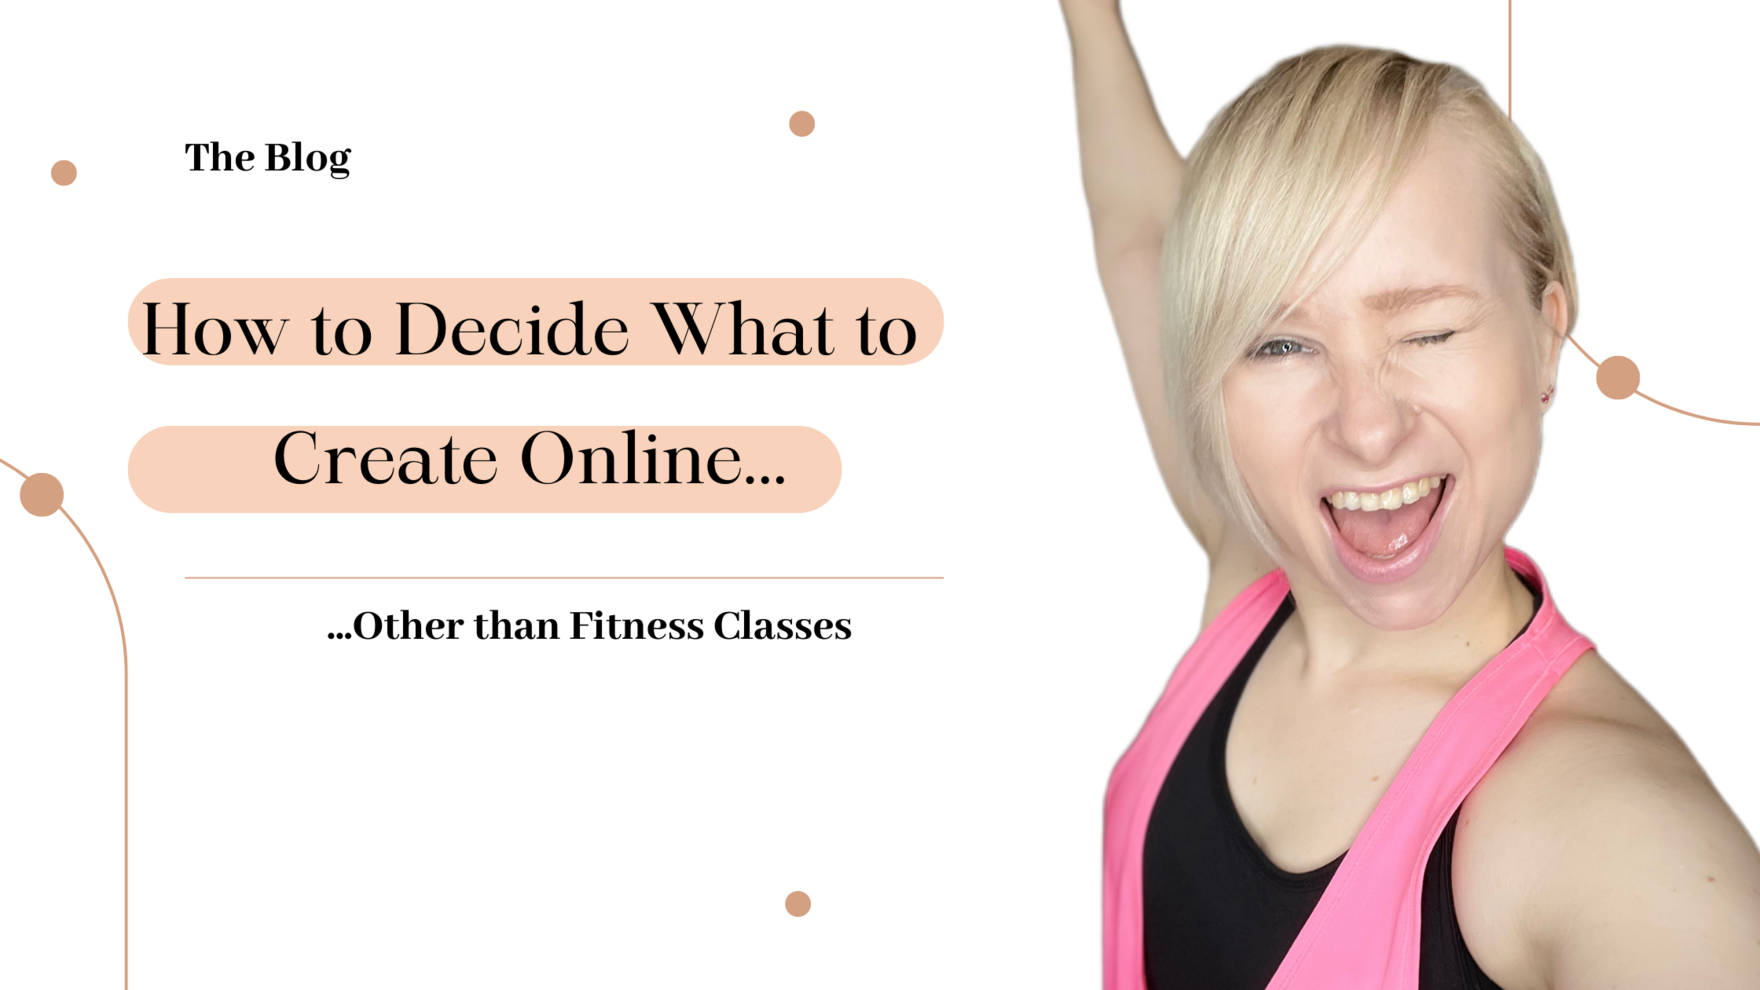 How to Decide What to Create Online